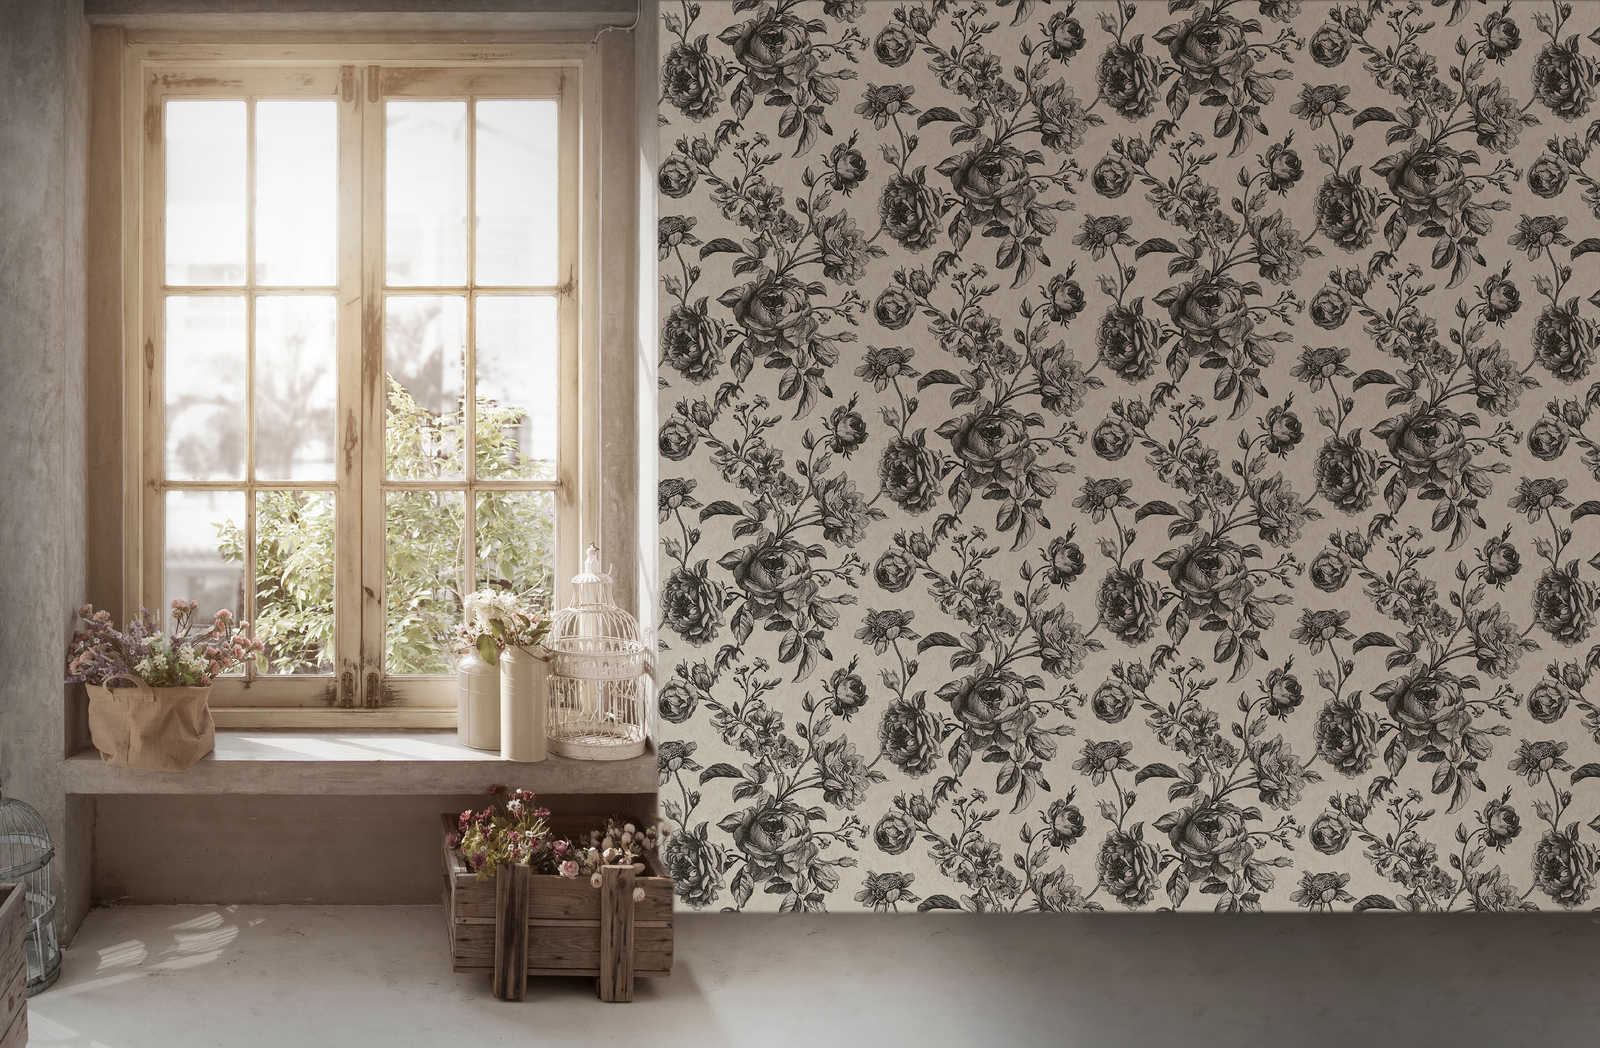             Black and cream wallpaper roses floral pattern - white, black, grey
        